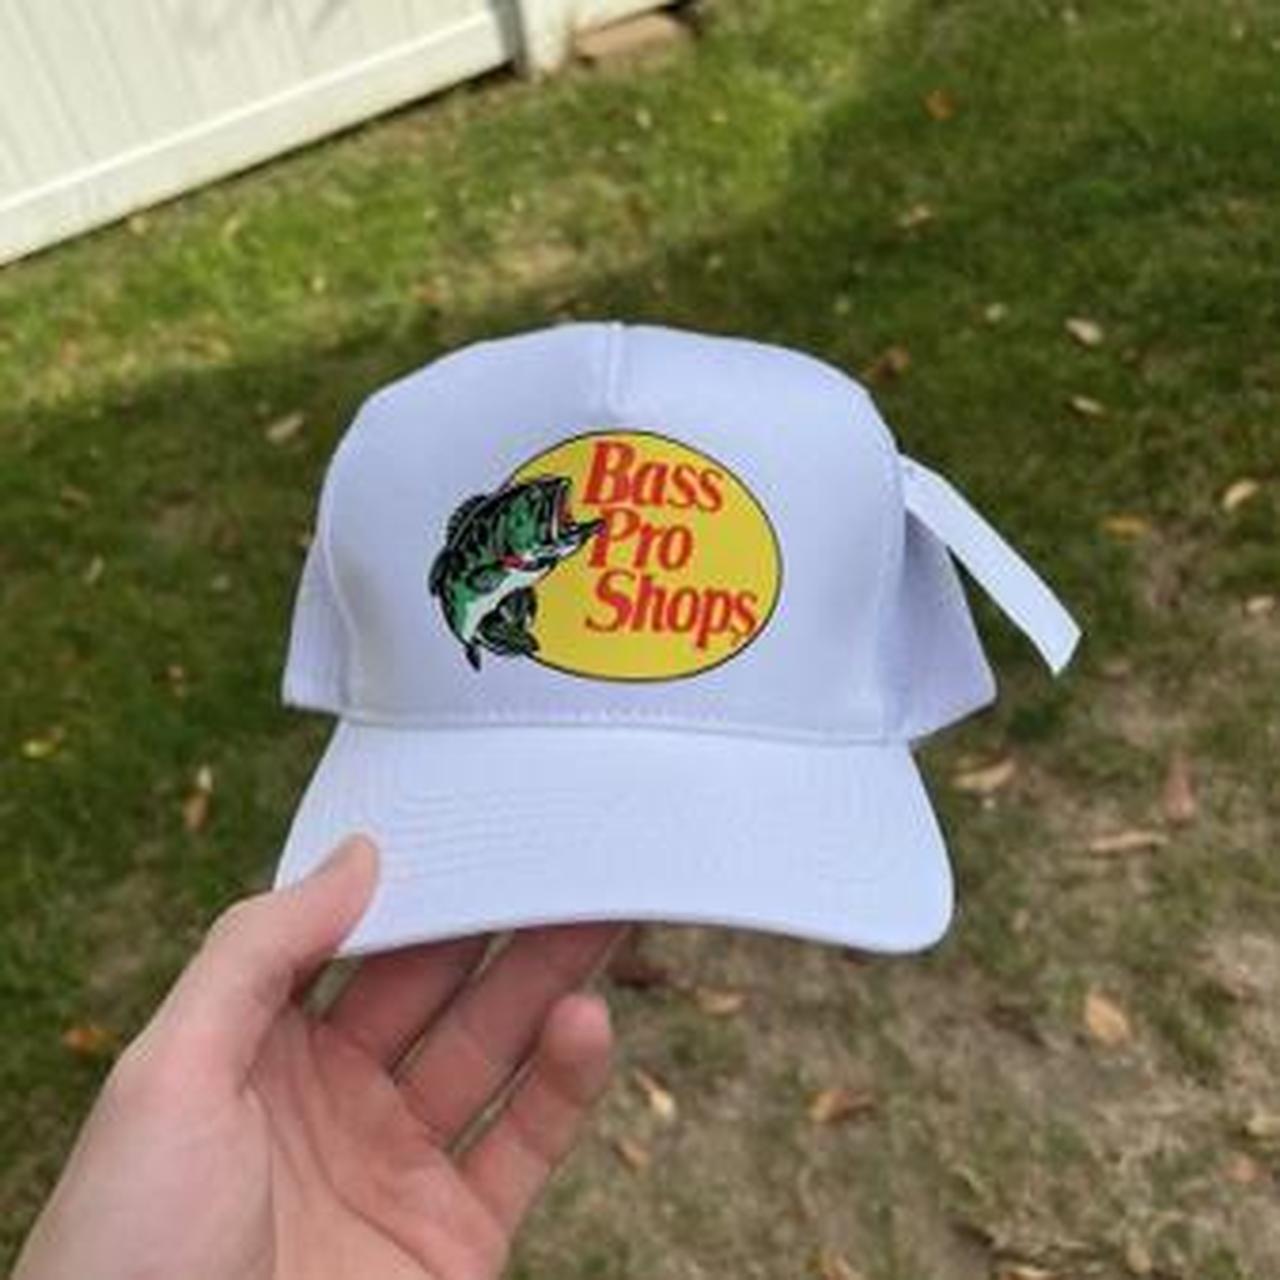 Vintage Bass Pro Shops Trucker Hat White new with tags - Depop